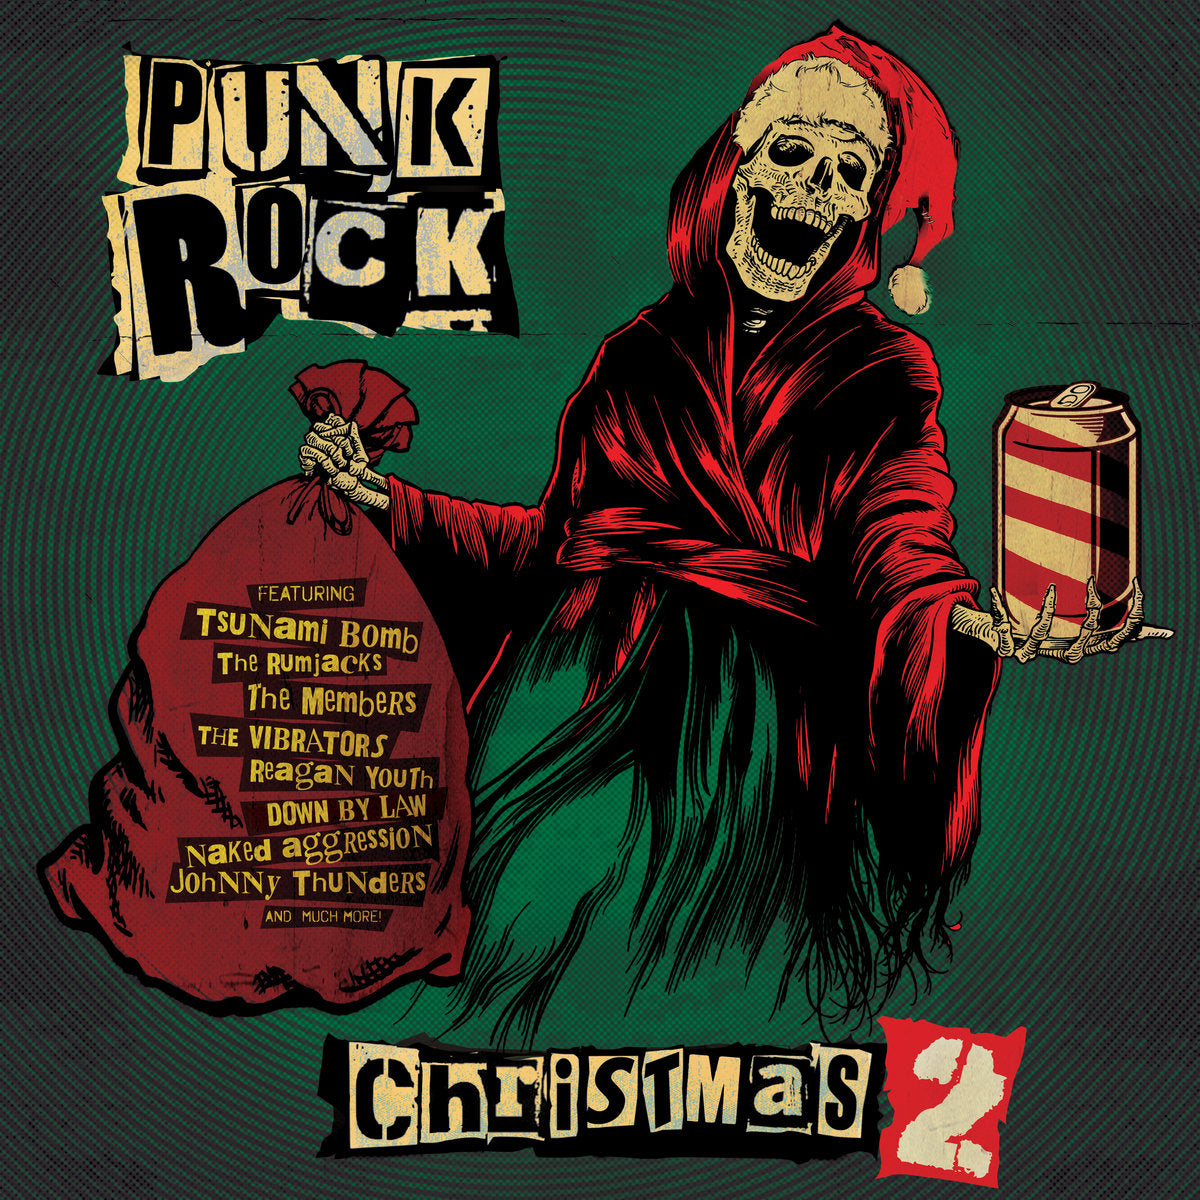 Album cover for "Punk Rock Christmas Vol. 2" featuring a skeletal Santa in red robes holding a sack and gift, with band names like Tsunami Bomb and The Rumjacks listed.